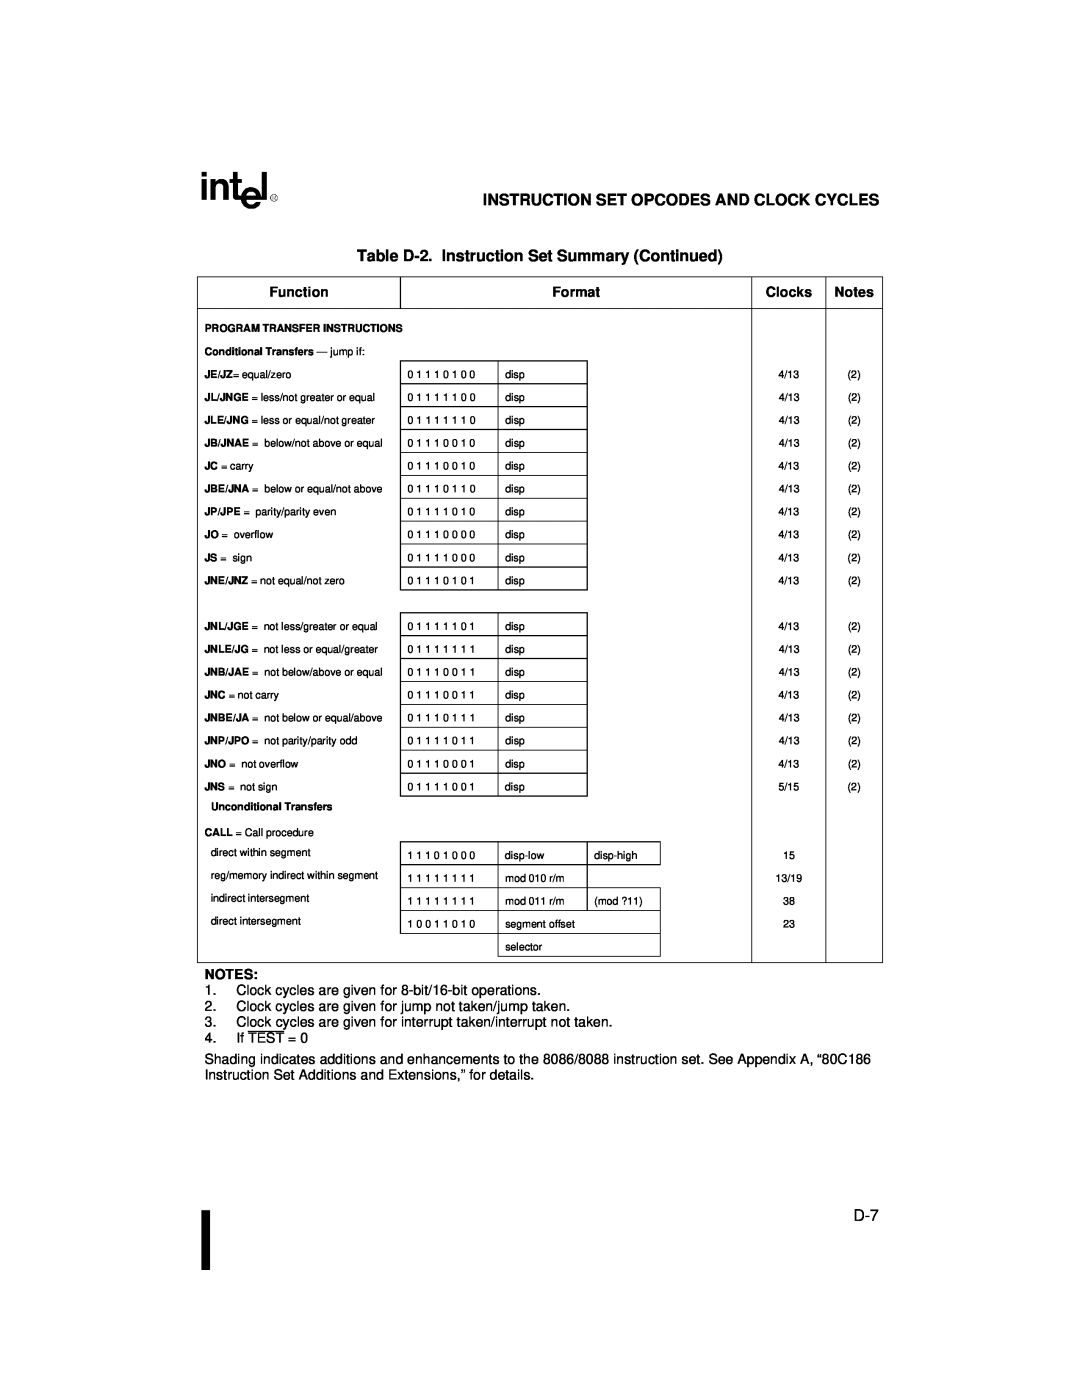 Intel 80C188XL, 80C186XL user manual Instruction Set Opcodes And Clock Cycles, Table D-2.Instruction Set Summary Continued 